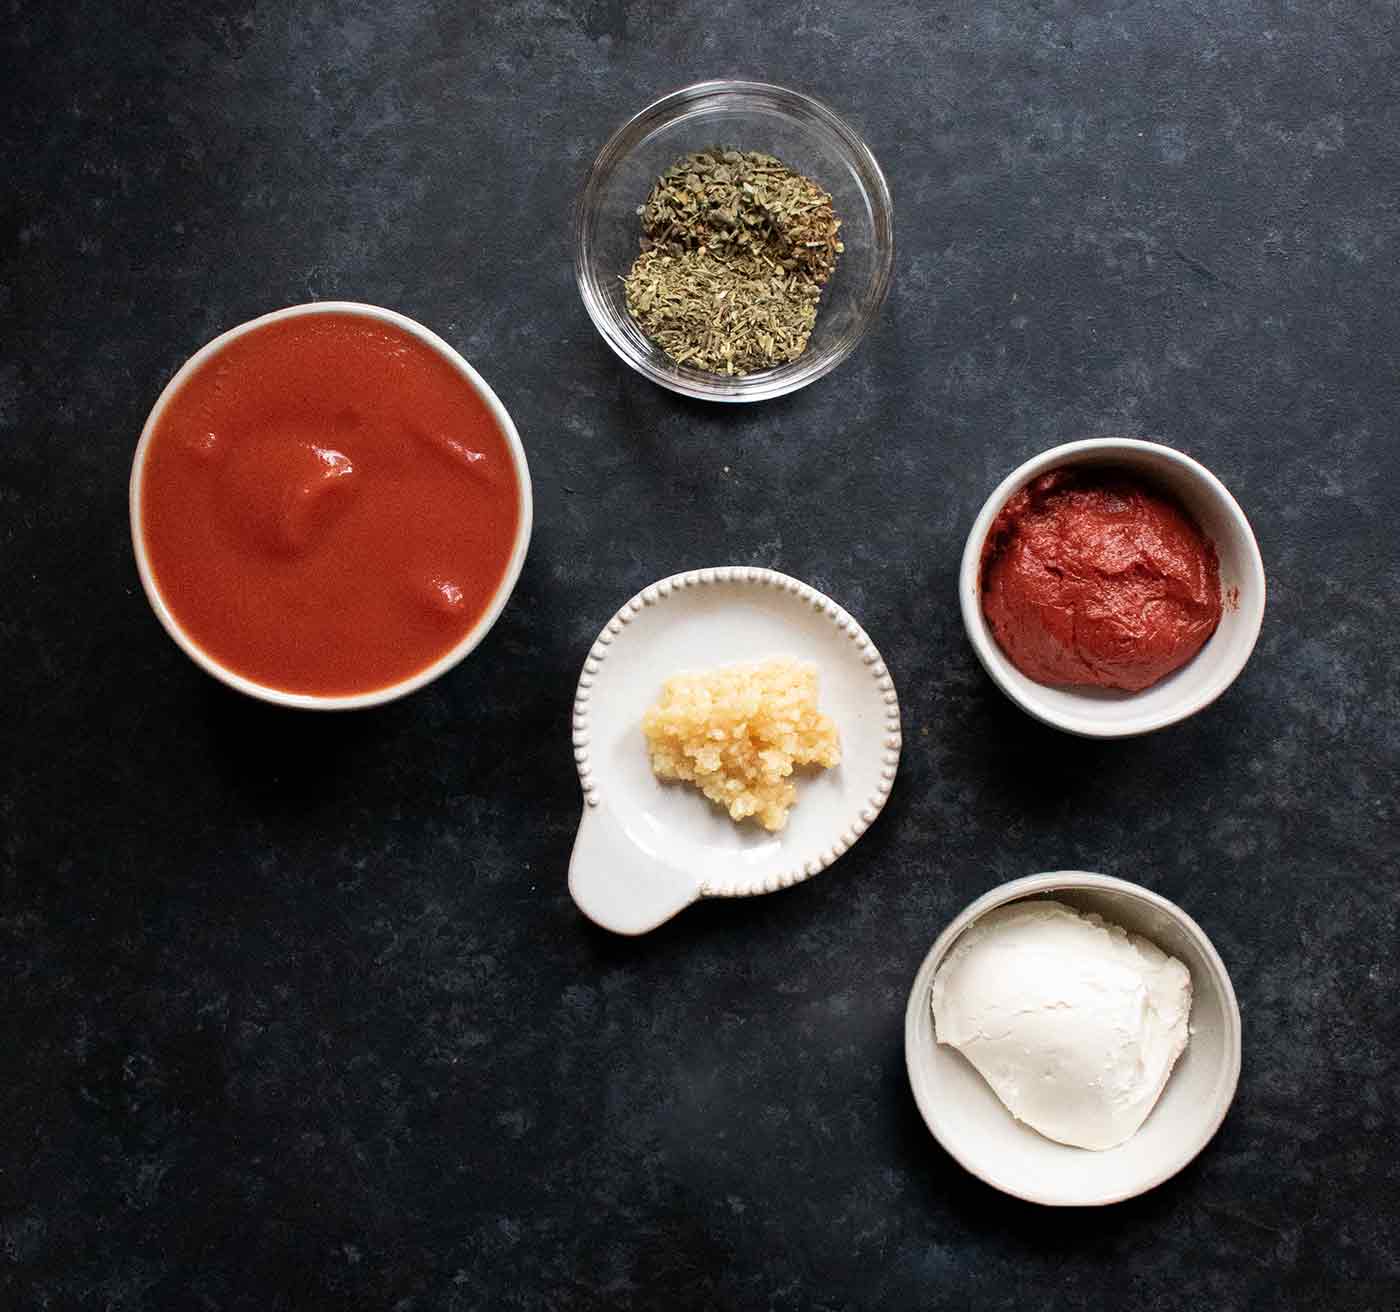 Seasoning ingredients for Creamy Tomato Soup in small pinch bowls.